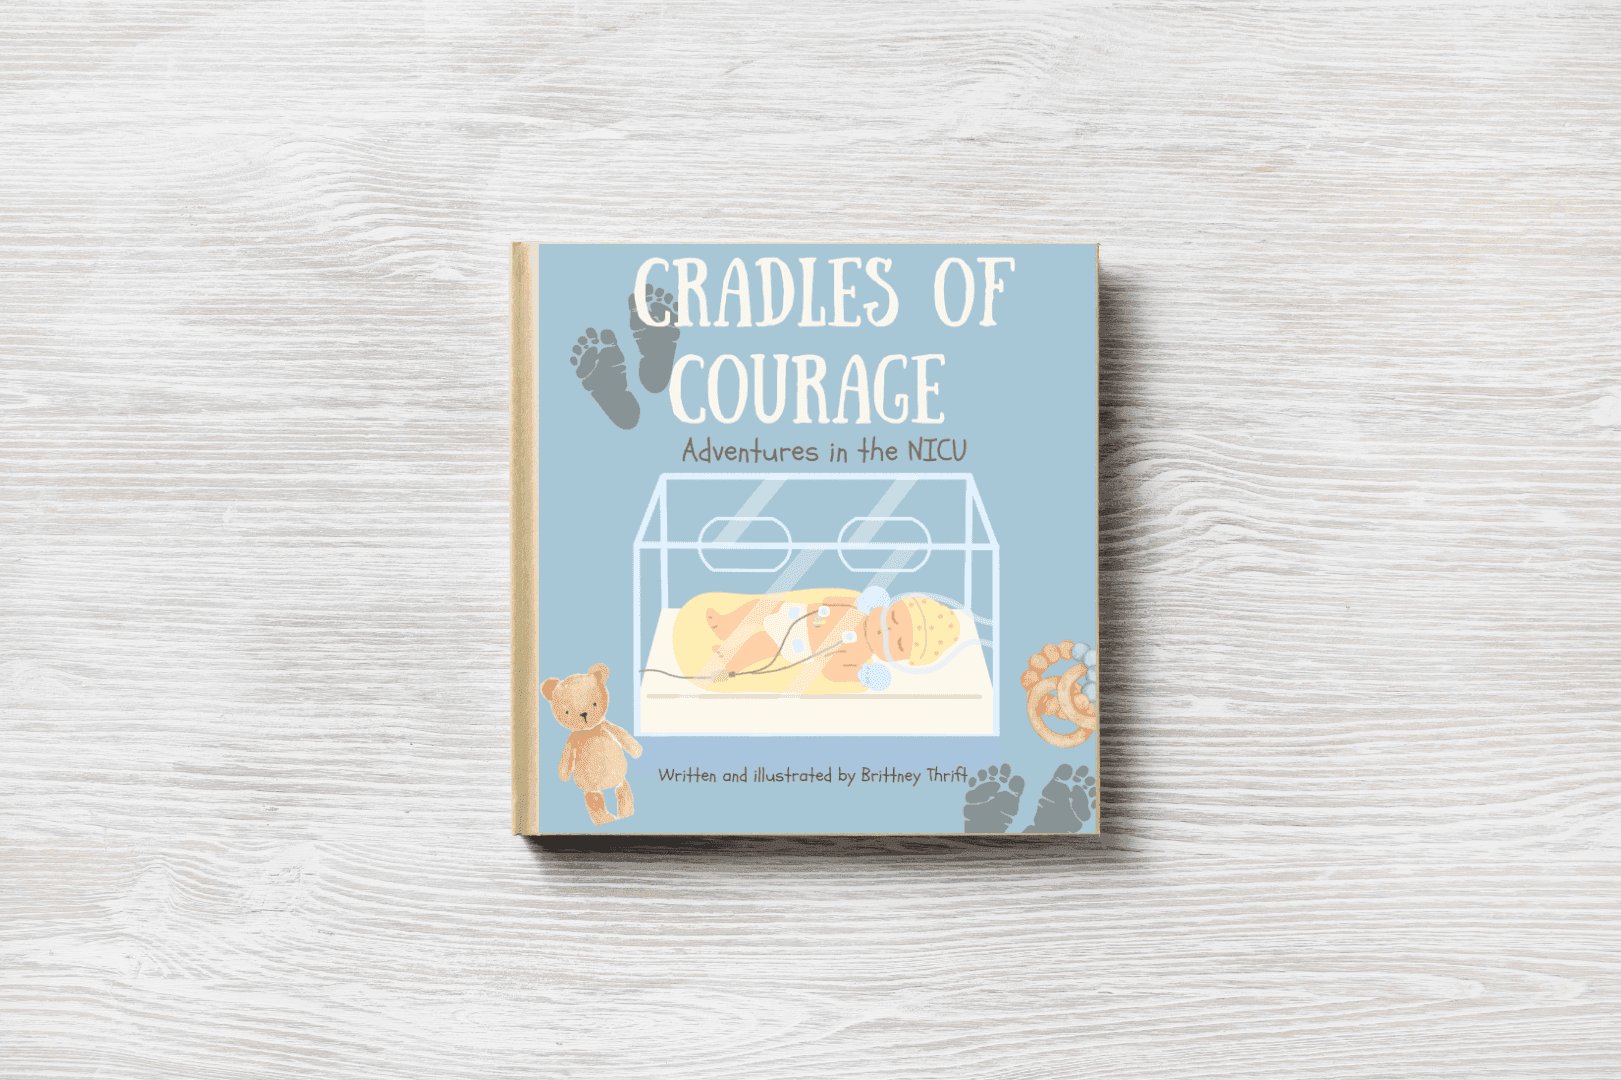 “Cradles of Courage: Adventures in the NICU.” (Blue Edition)